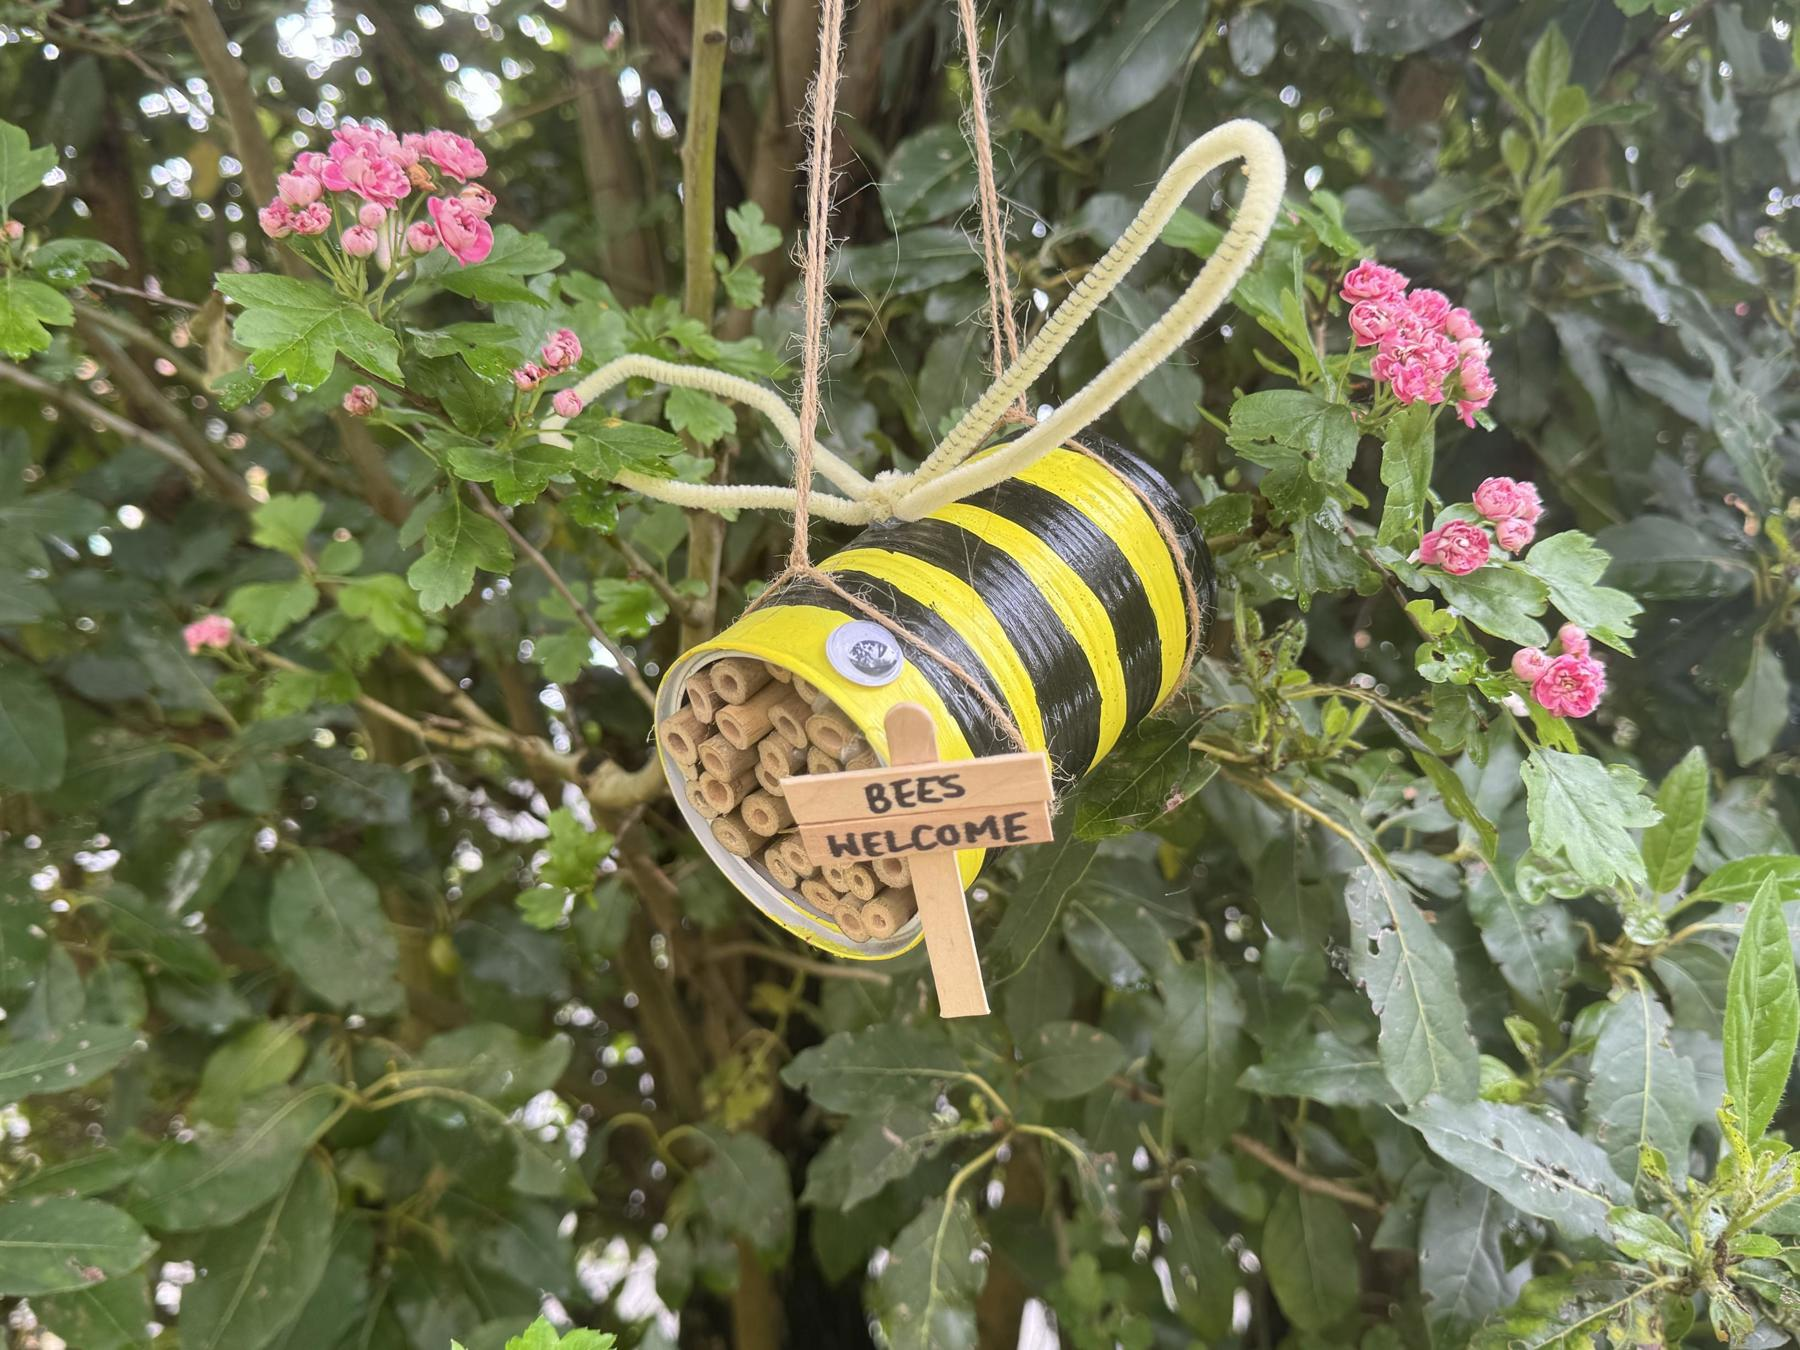 A picture of a bee hotel. It's a tin can, filled with bamboo sticks, that's been painted with black and yellow stripes to look like a bee.